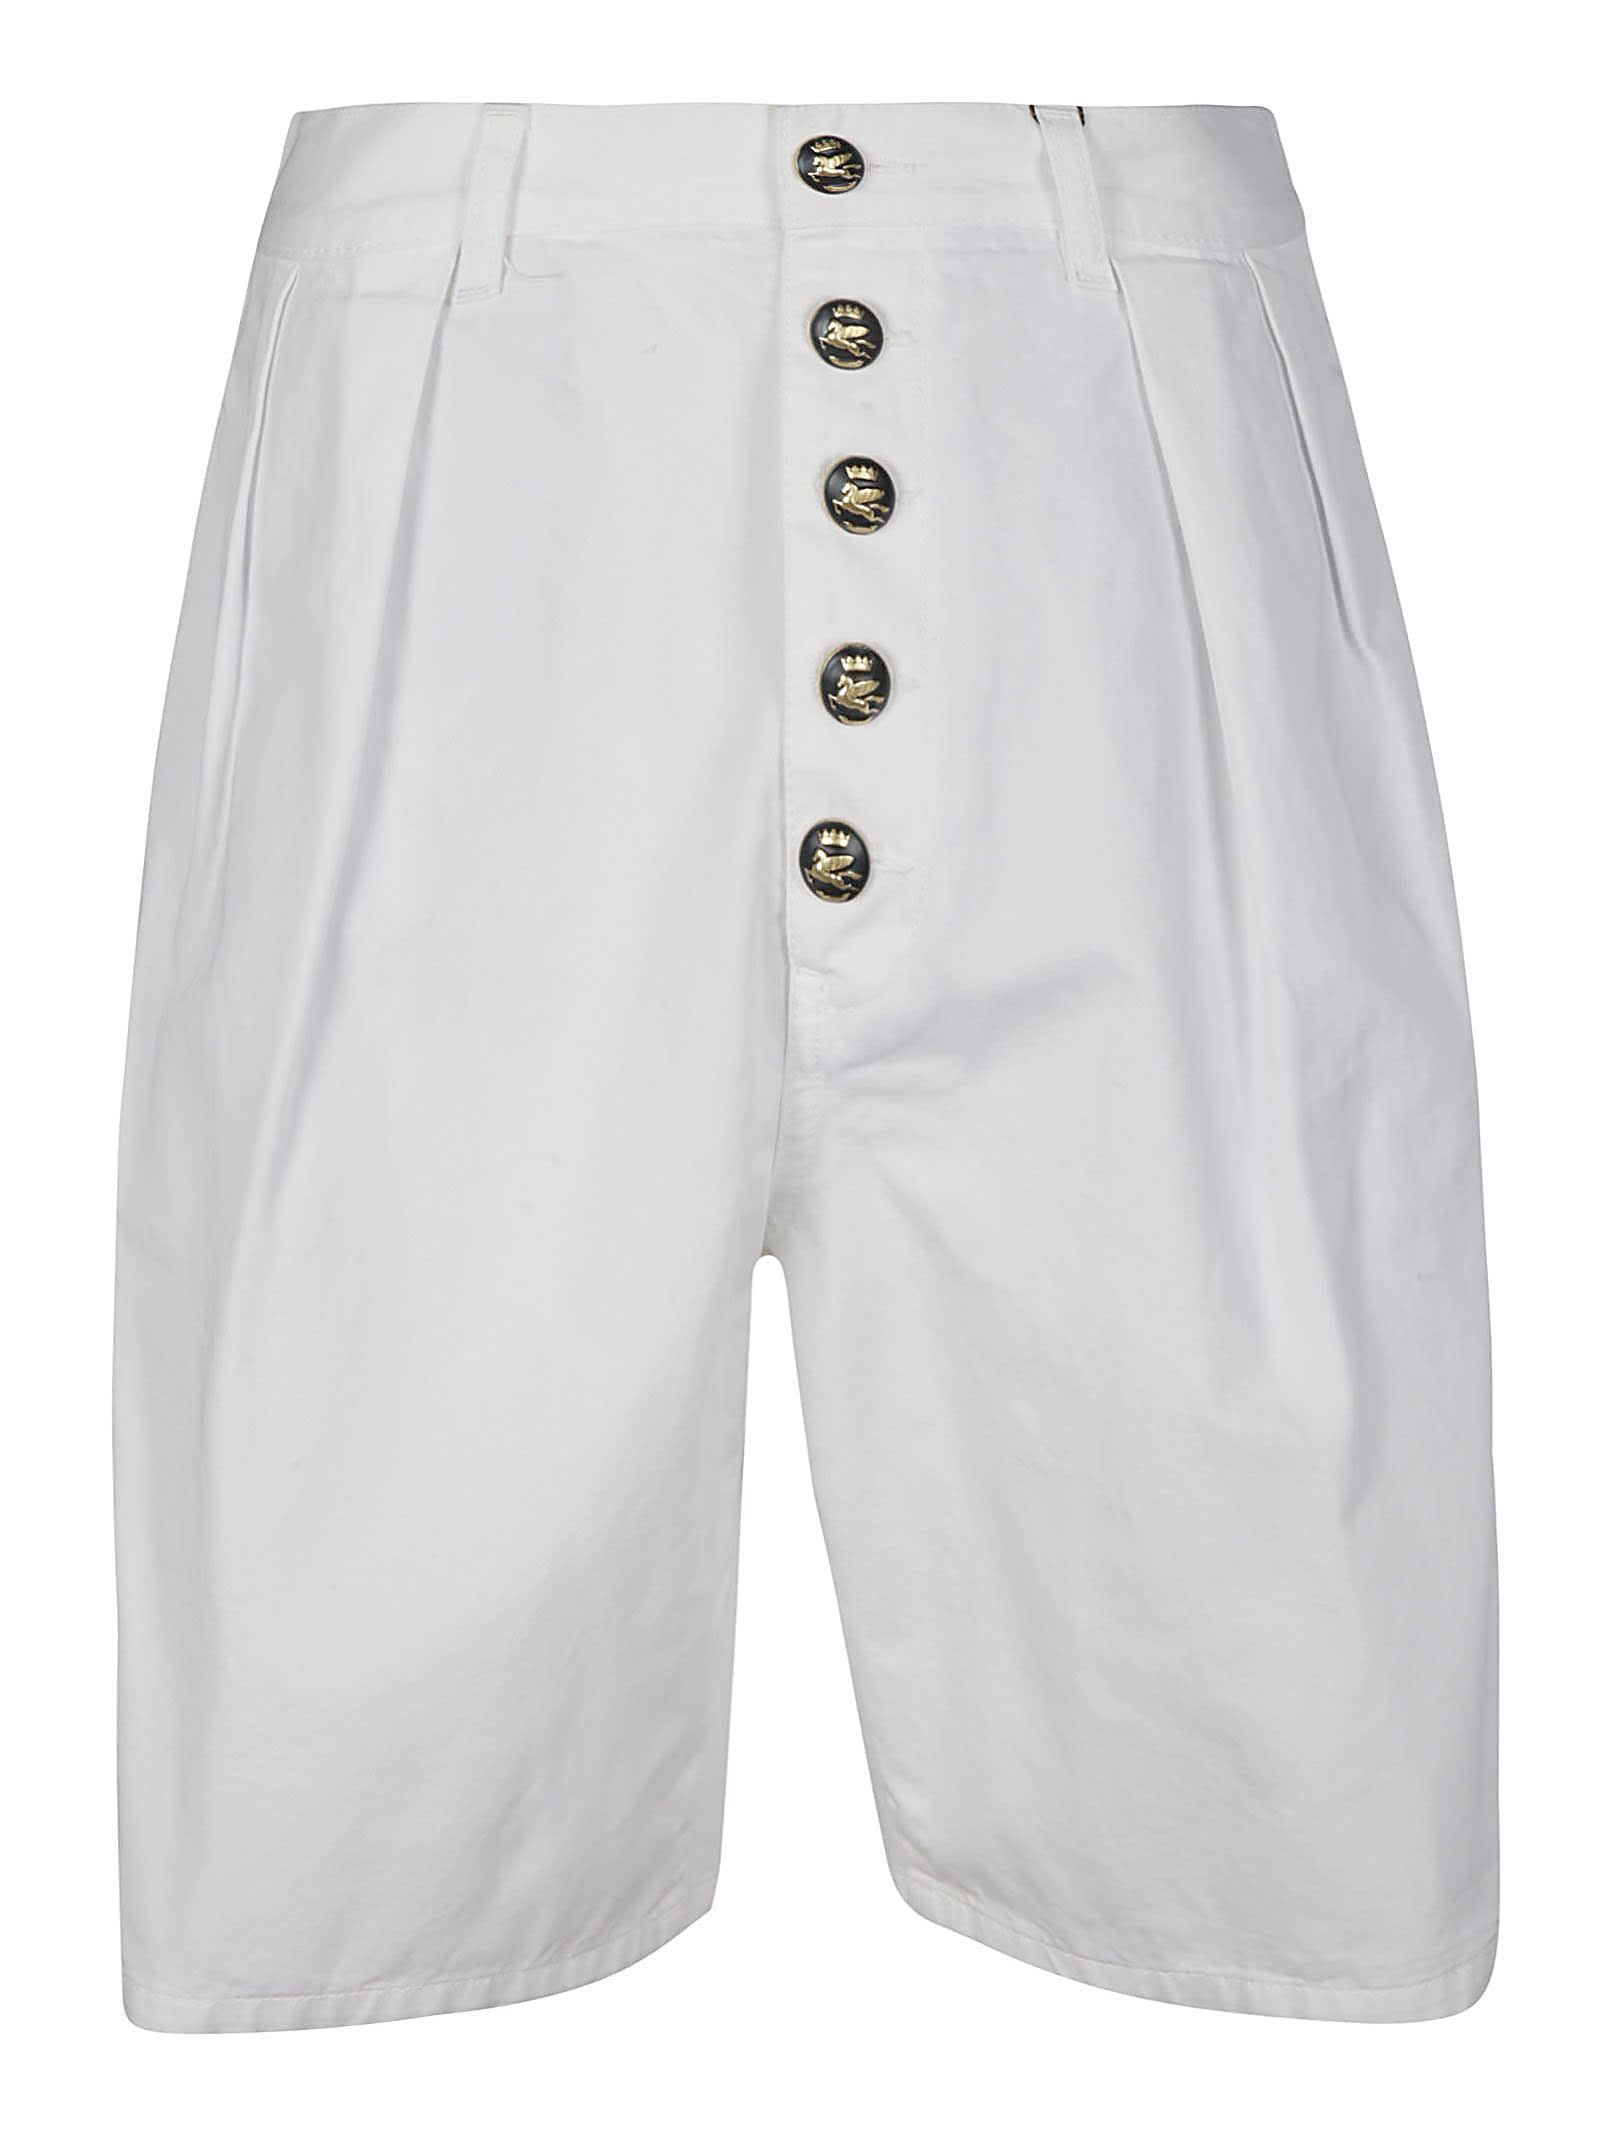 Etro Multi-buttoned Front Shorts